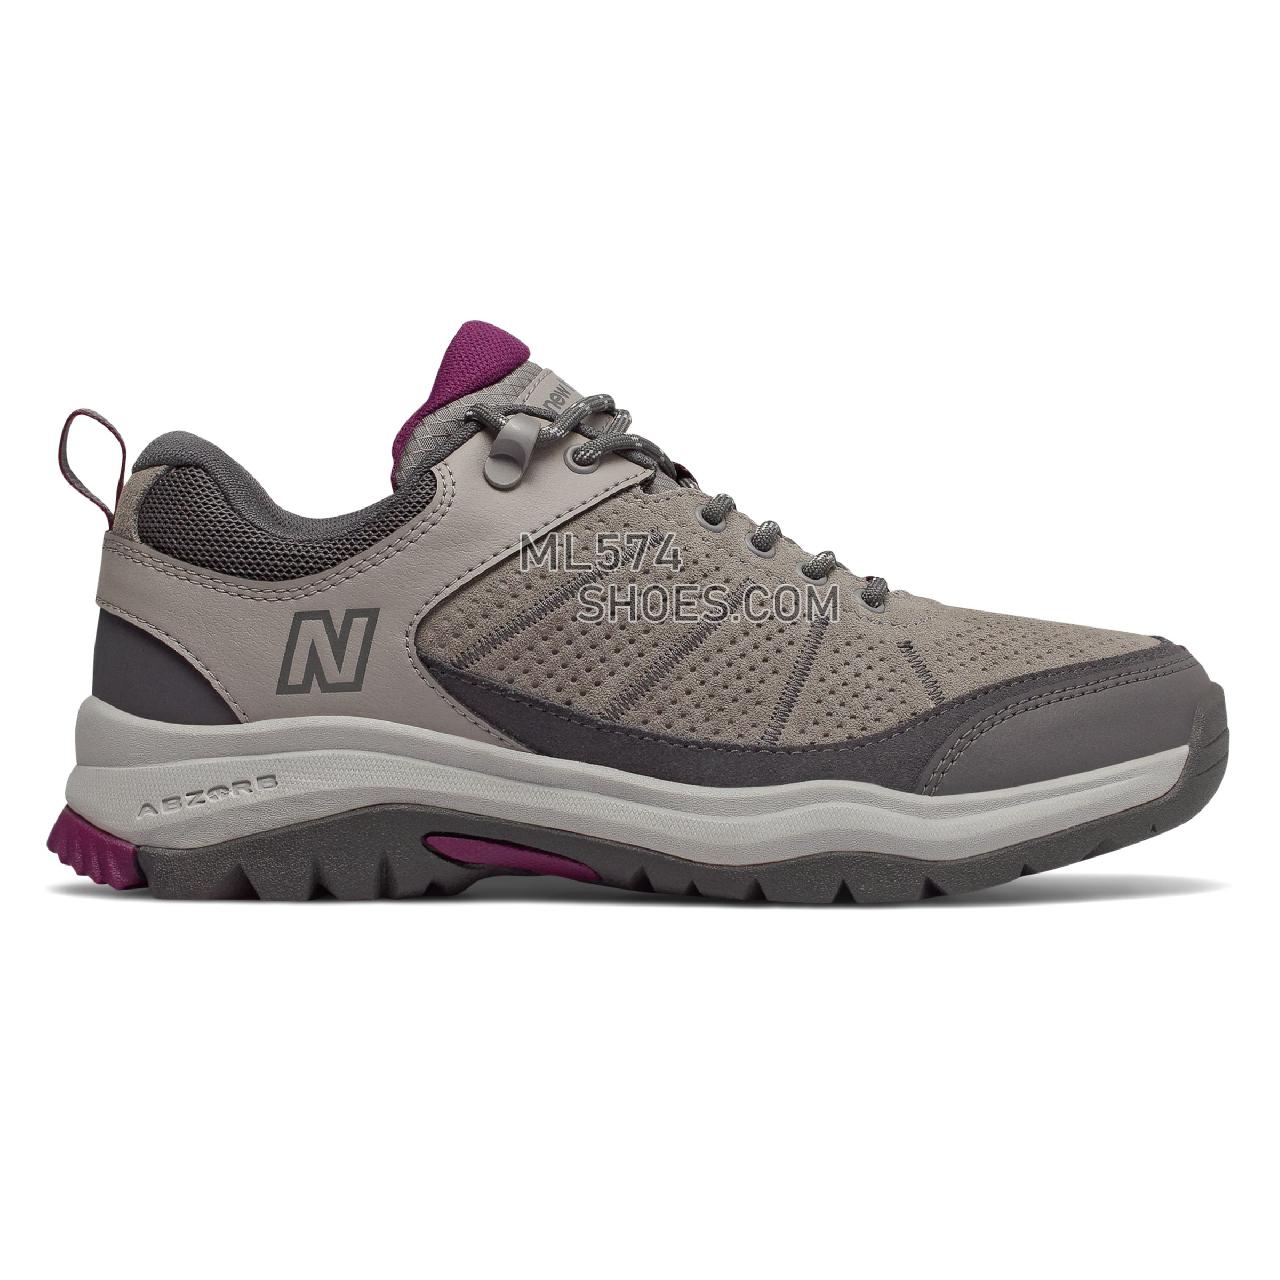 New Balance 1201 - Women's 1201 - Walking Marblehead with Magnet - WW1201MH